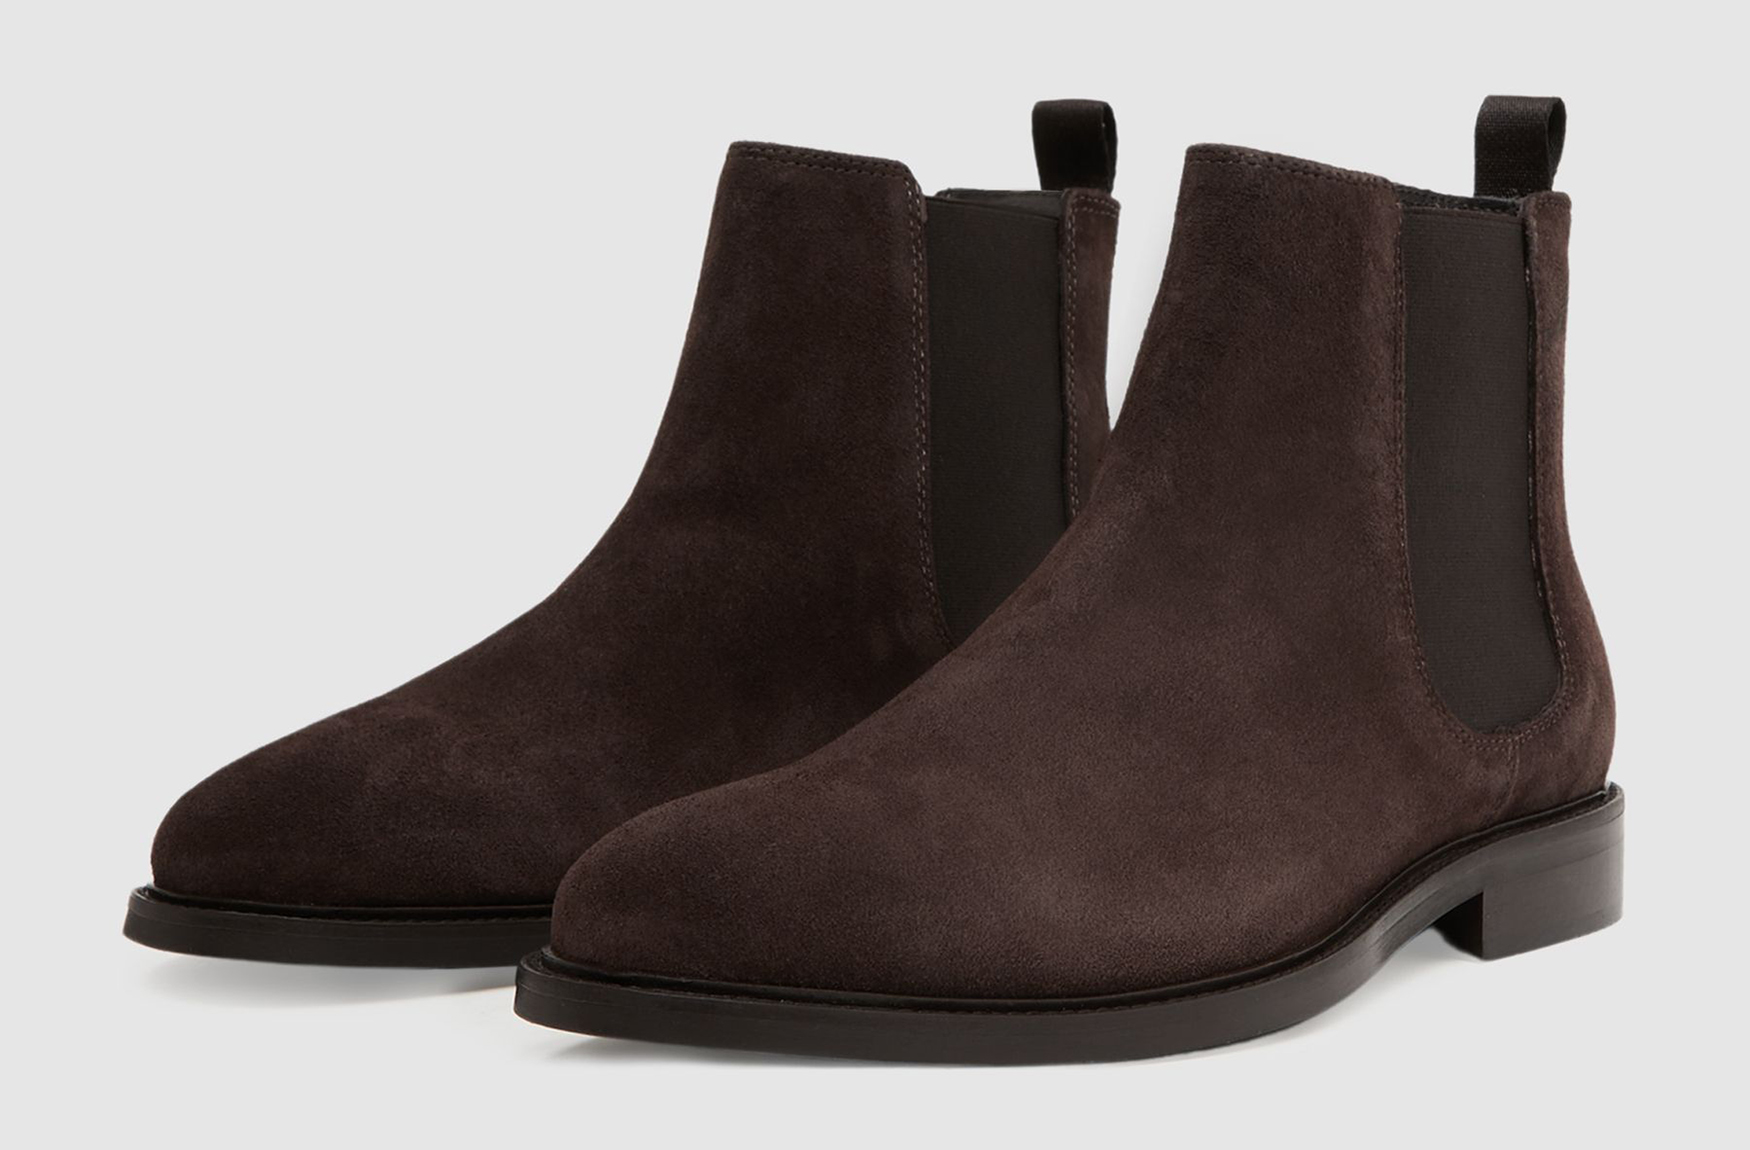 Brown Chelsea boot style